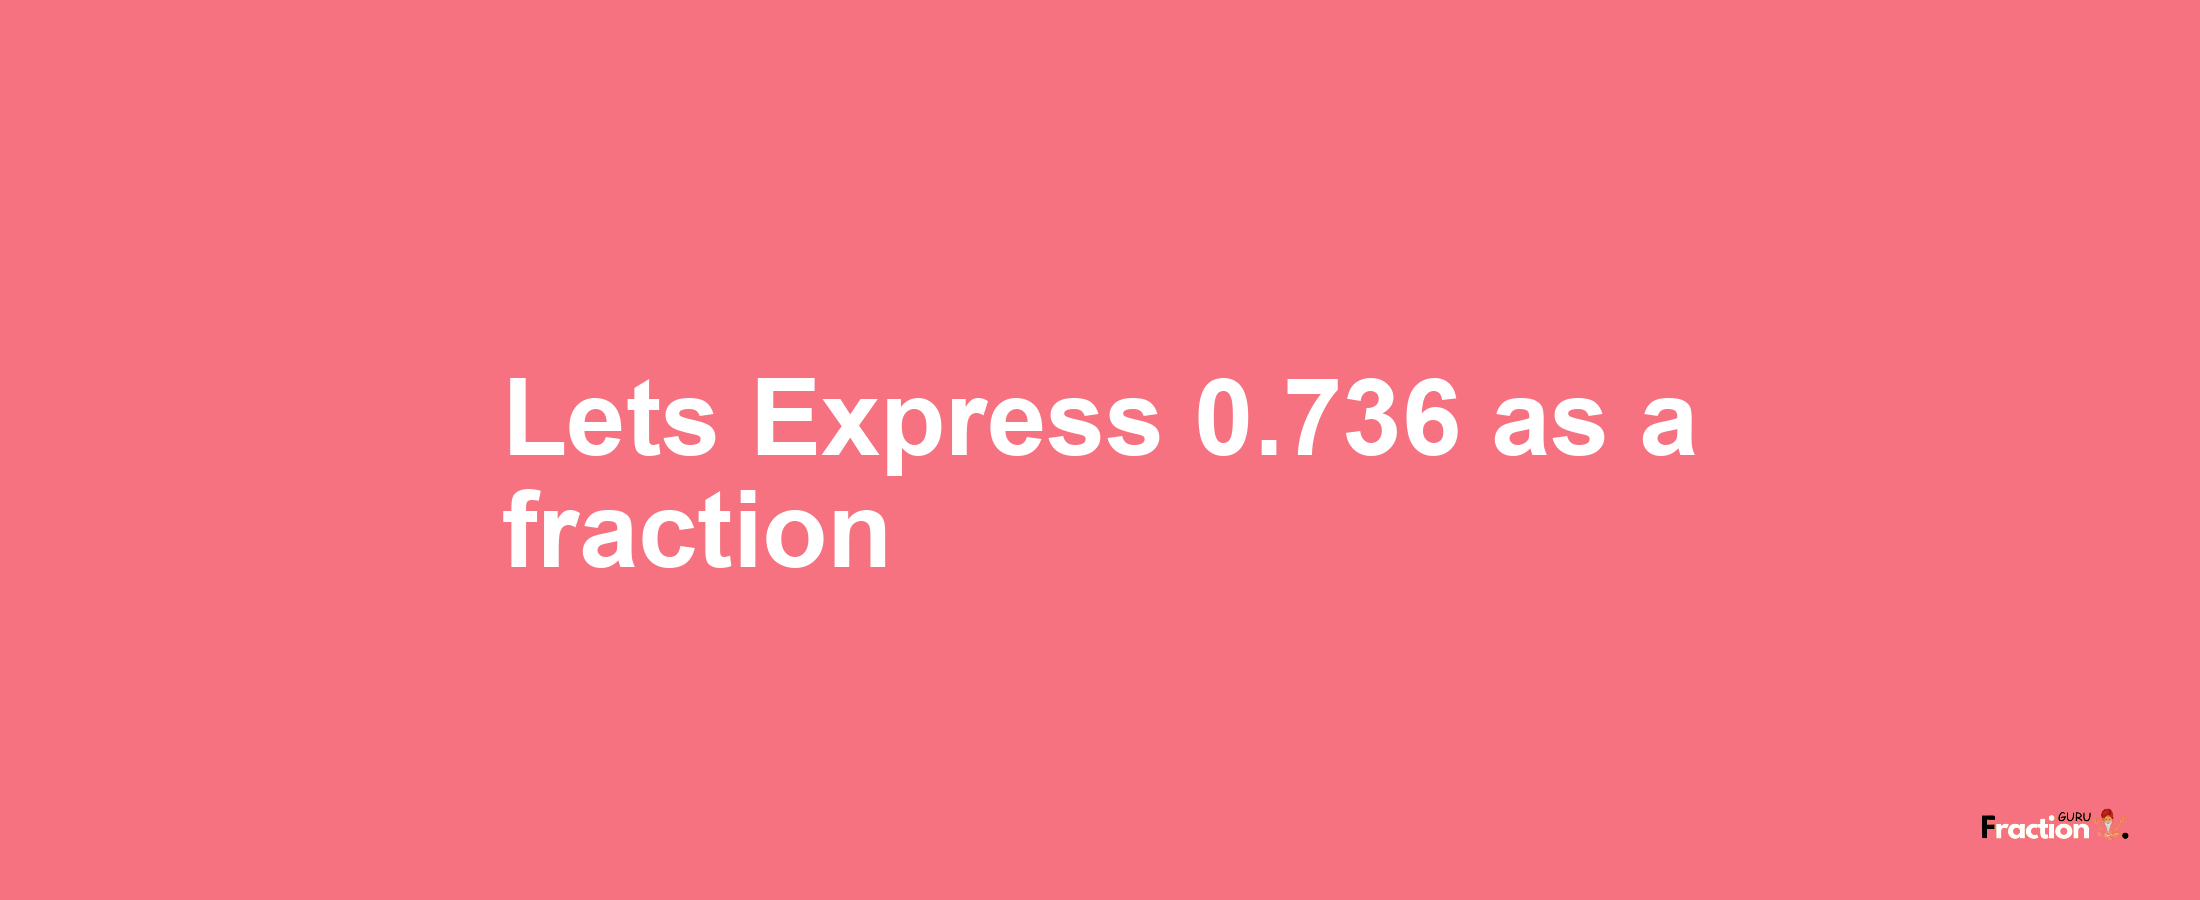 Lets Express 0.736 as afraction